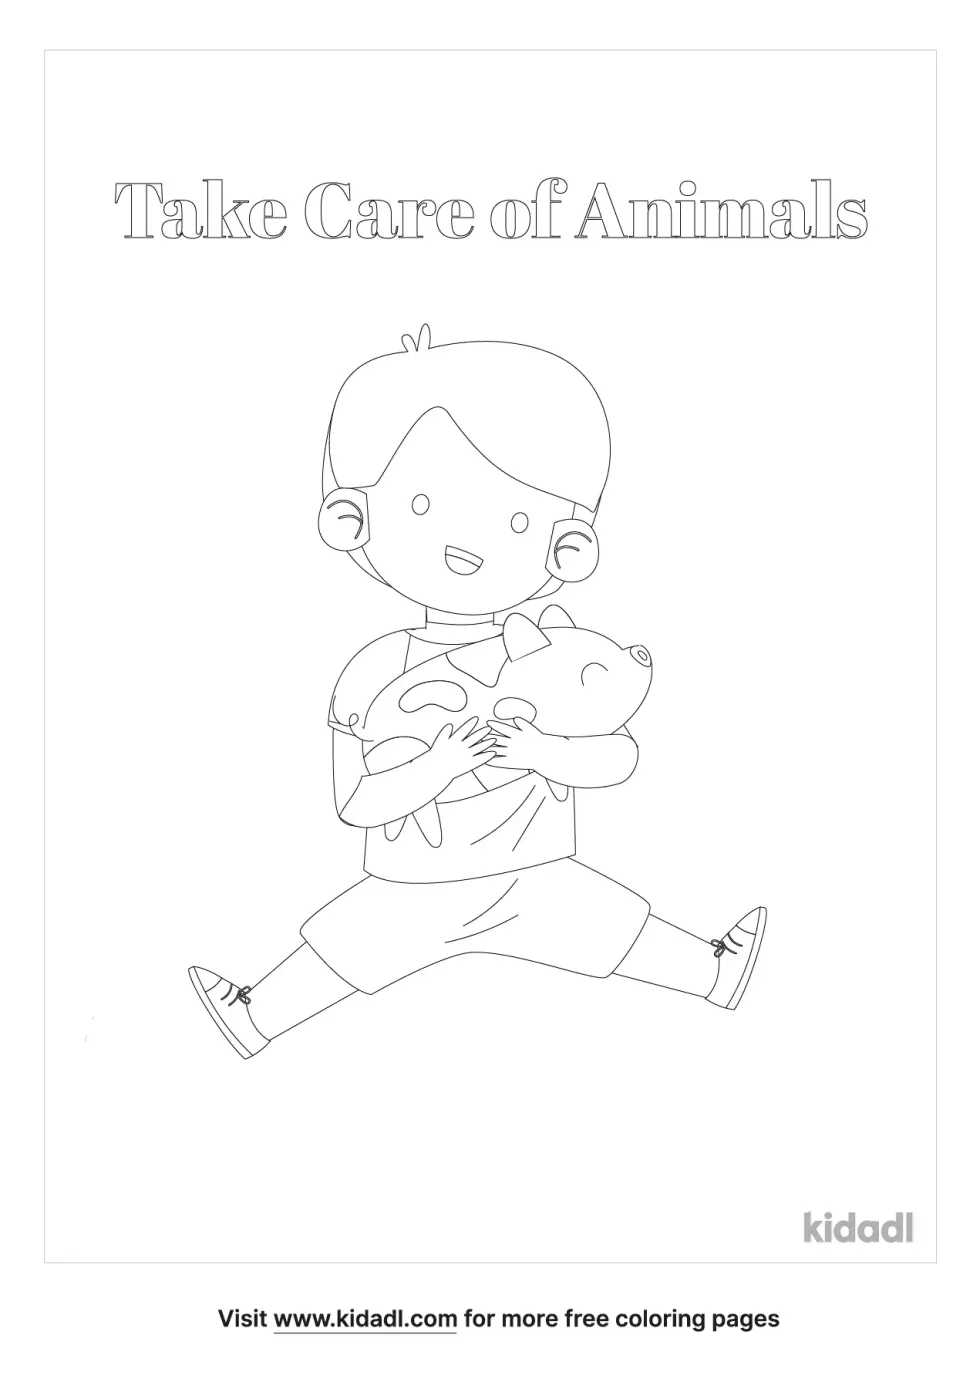 Take Care Of Animals Coloring Page